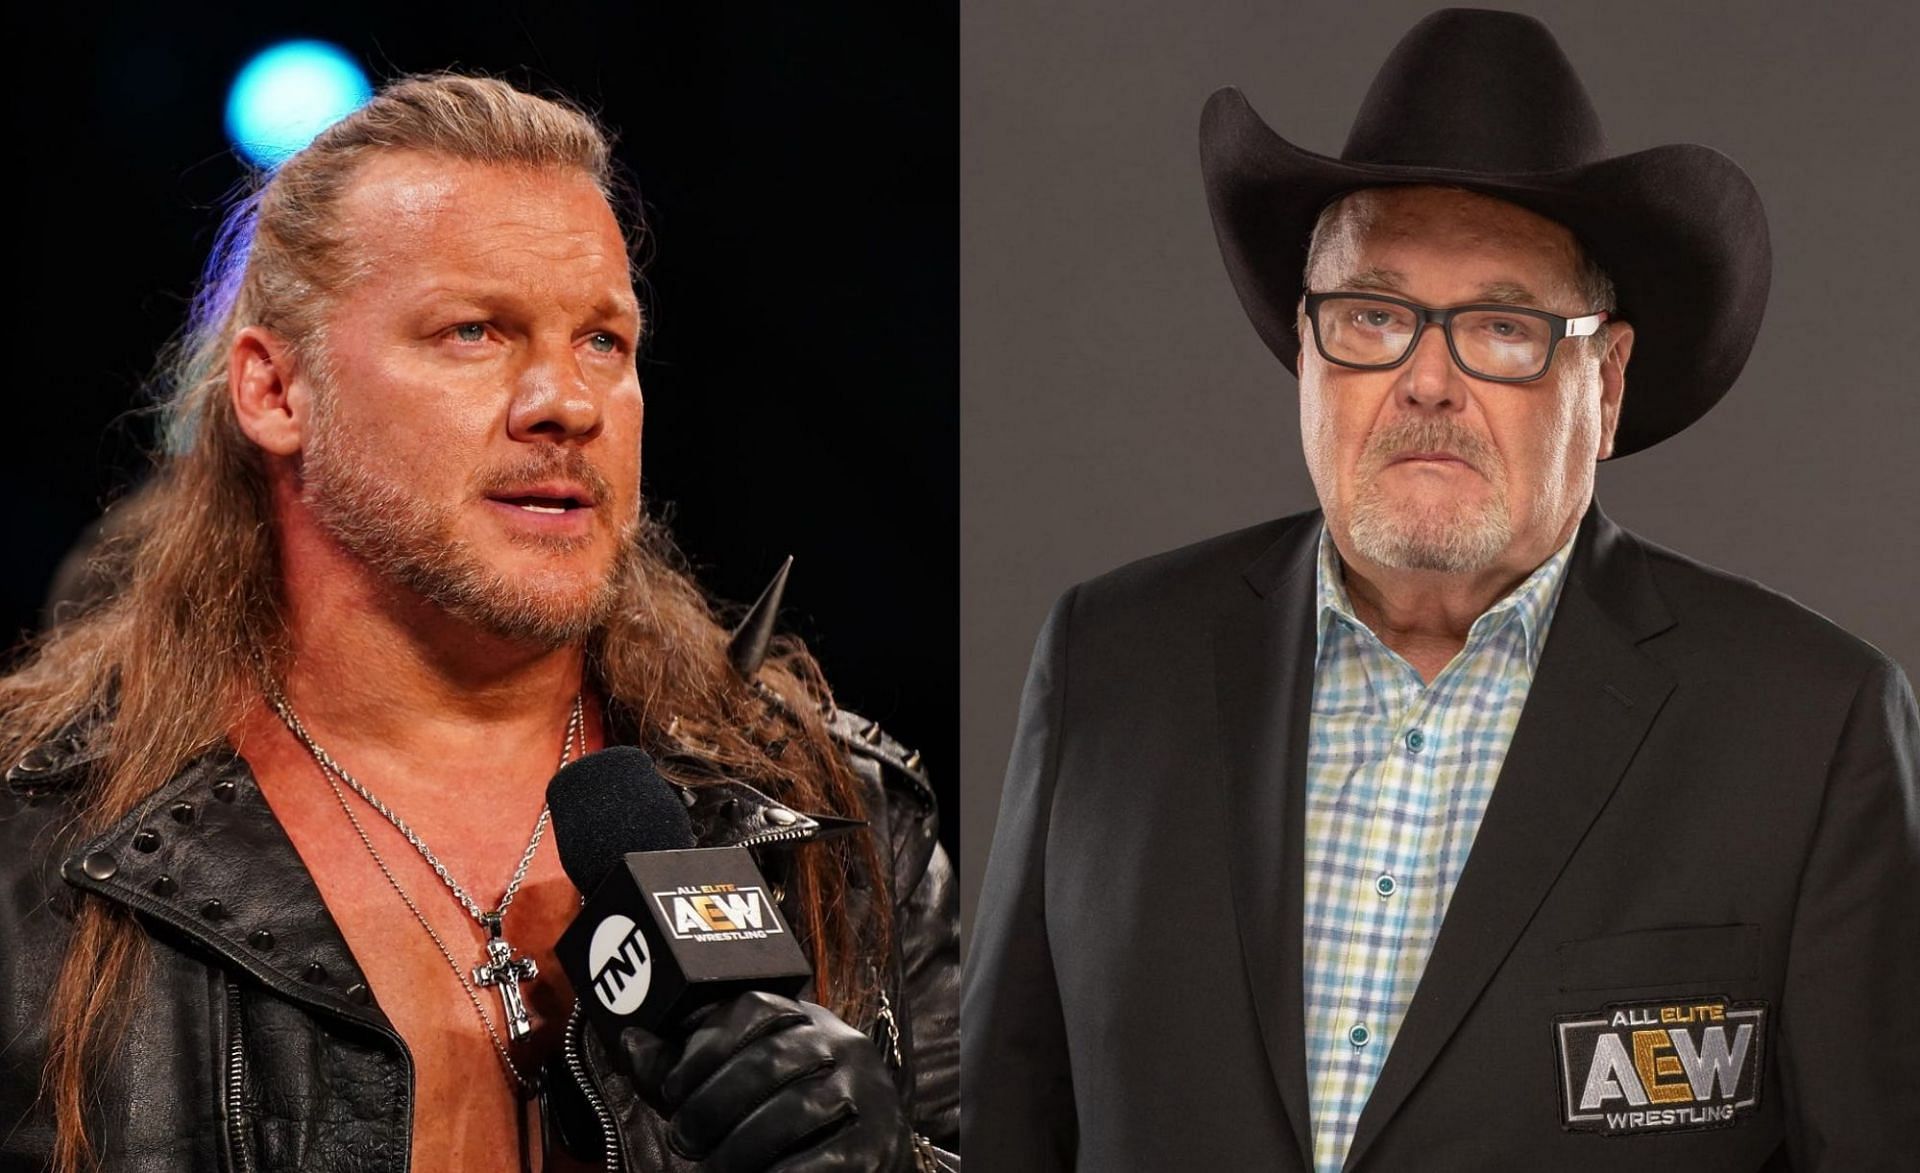 5 stars who can fill in for Jim Ross on commentary until he returns